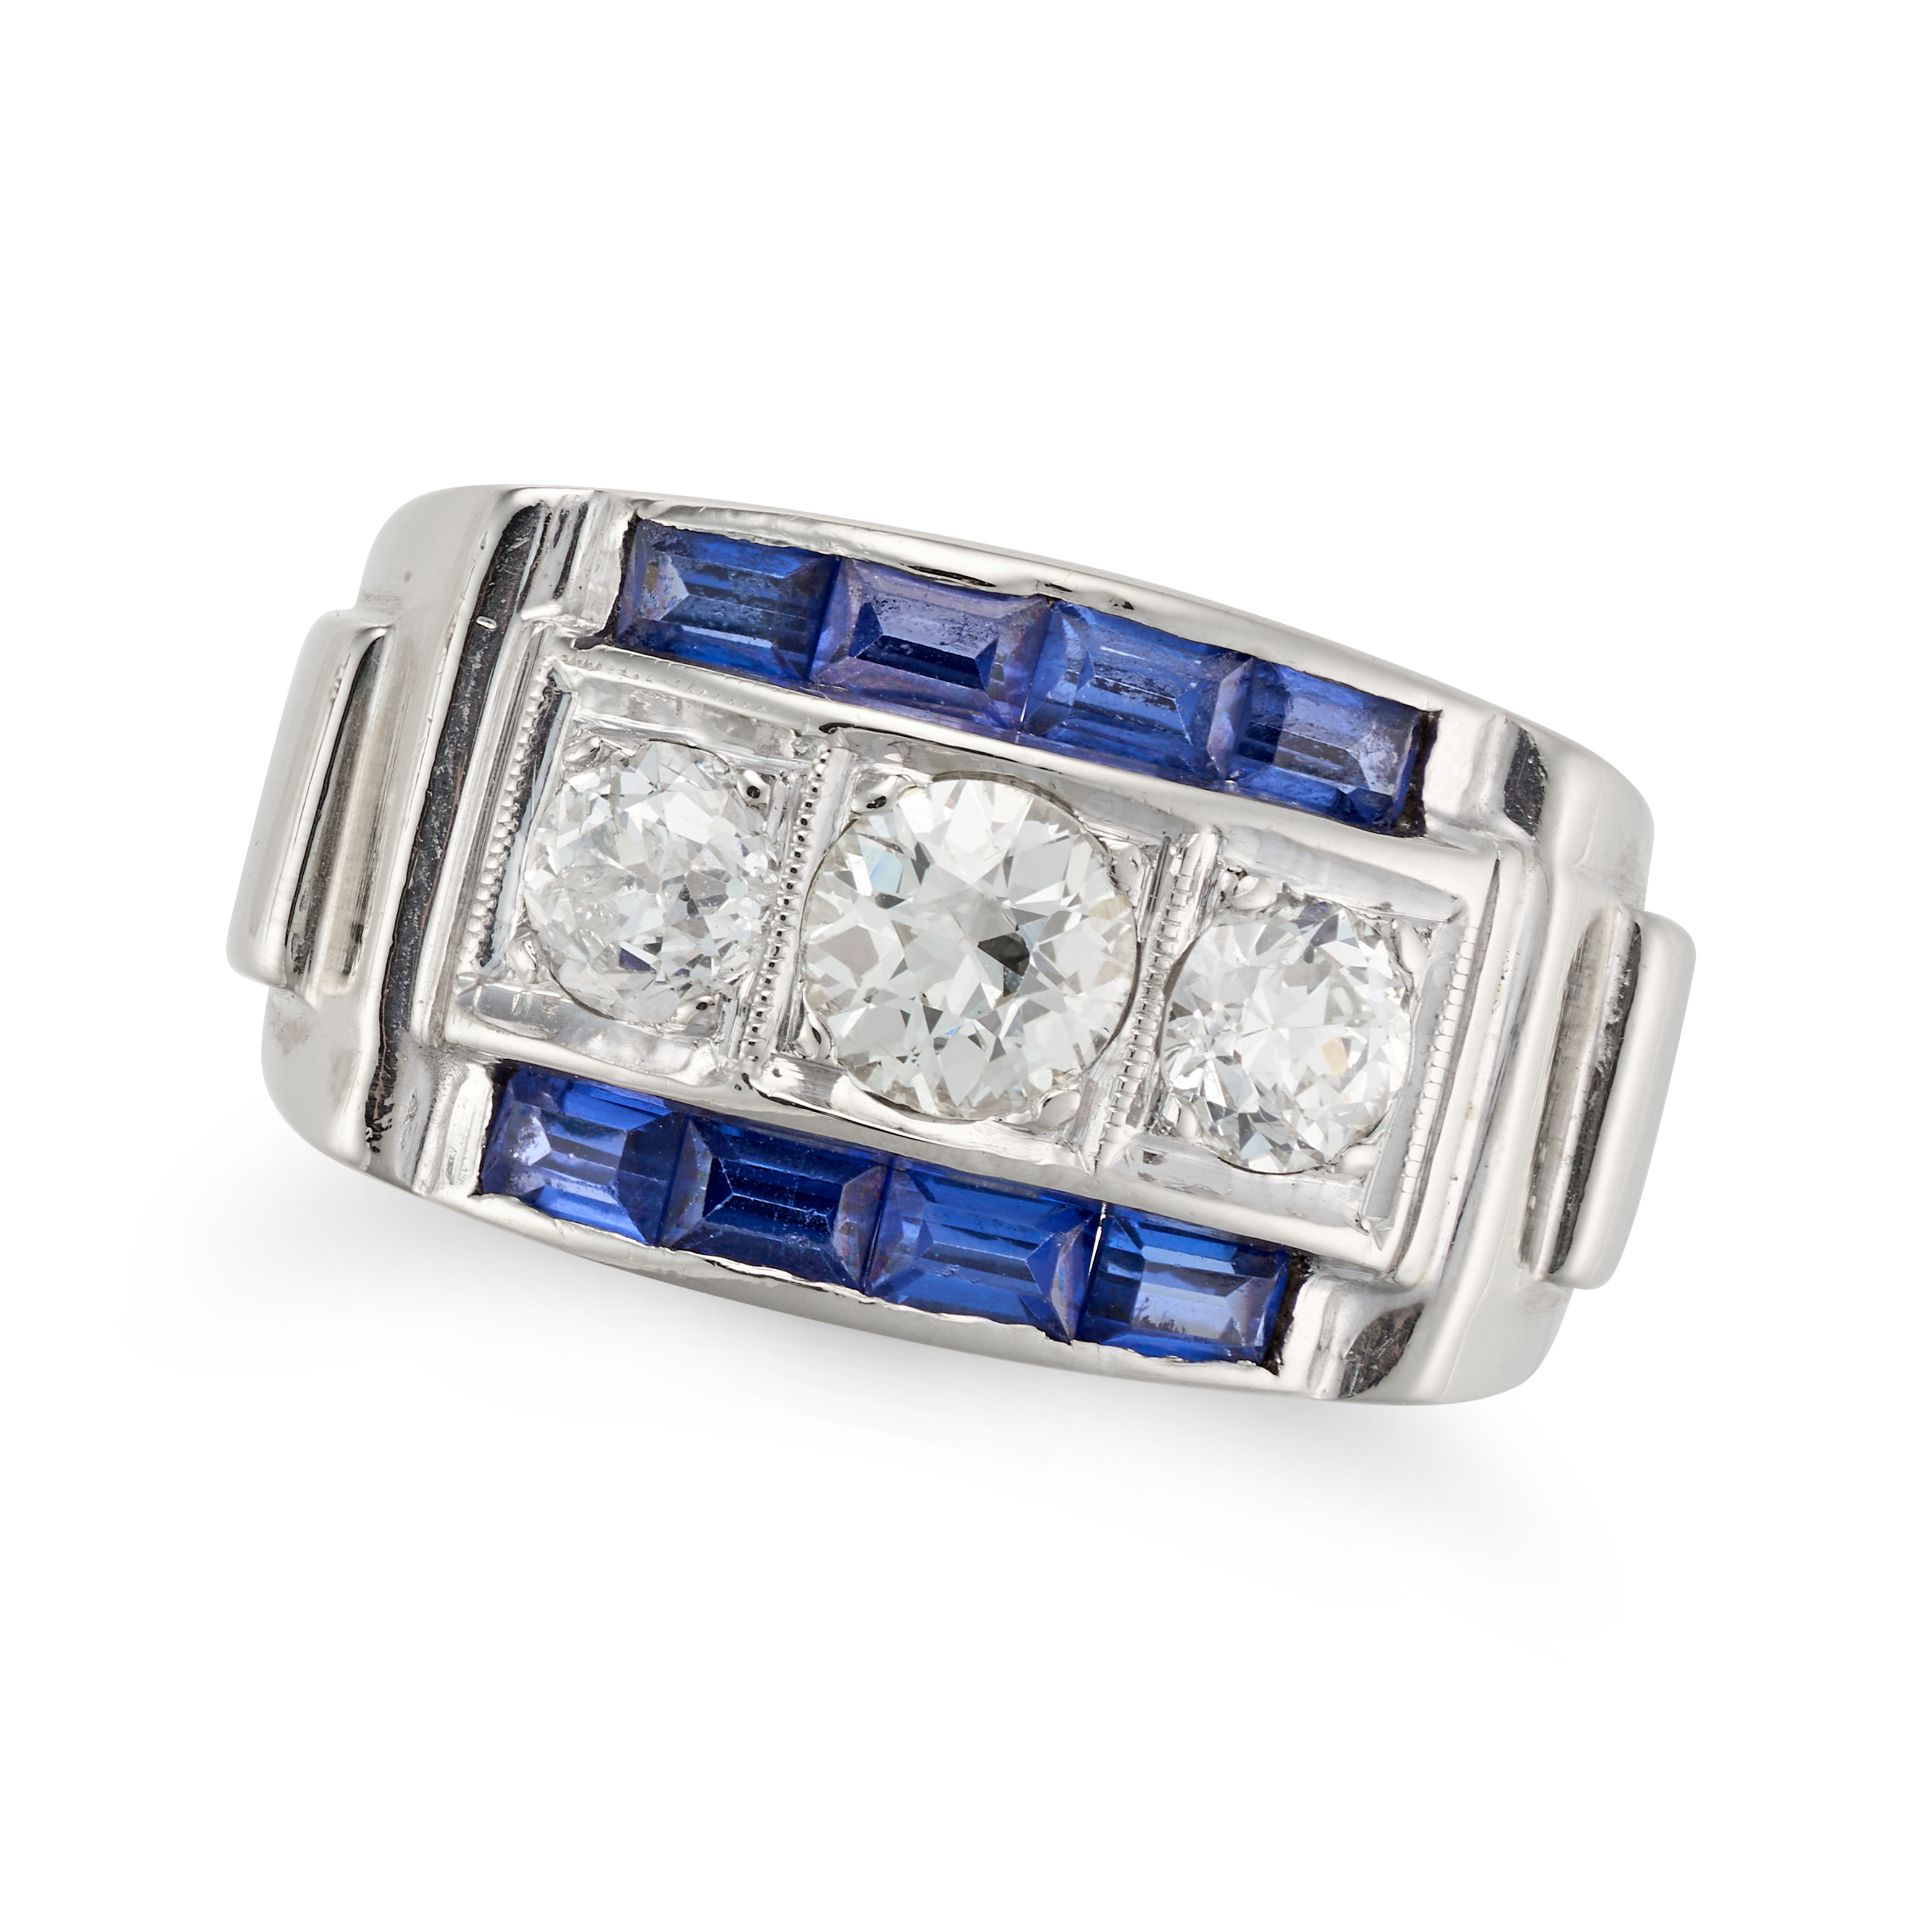 A DIAMOND AND SAPPHIRE RING, CIRCA 1940 set with three old European cut diamonds, accented on eac...